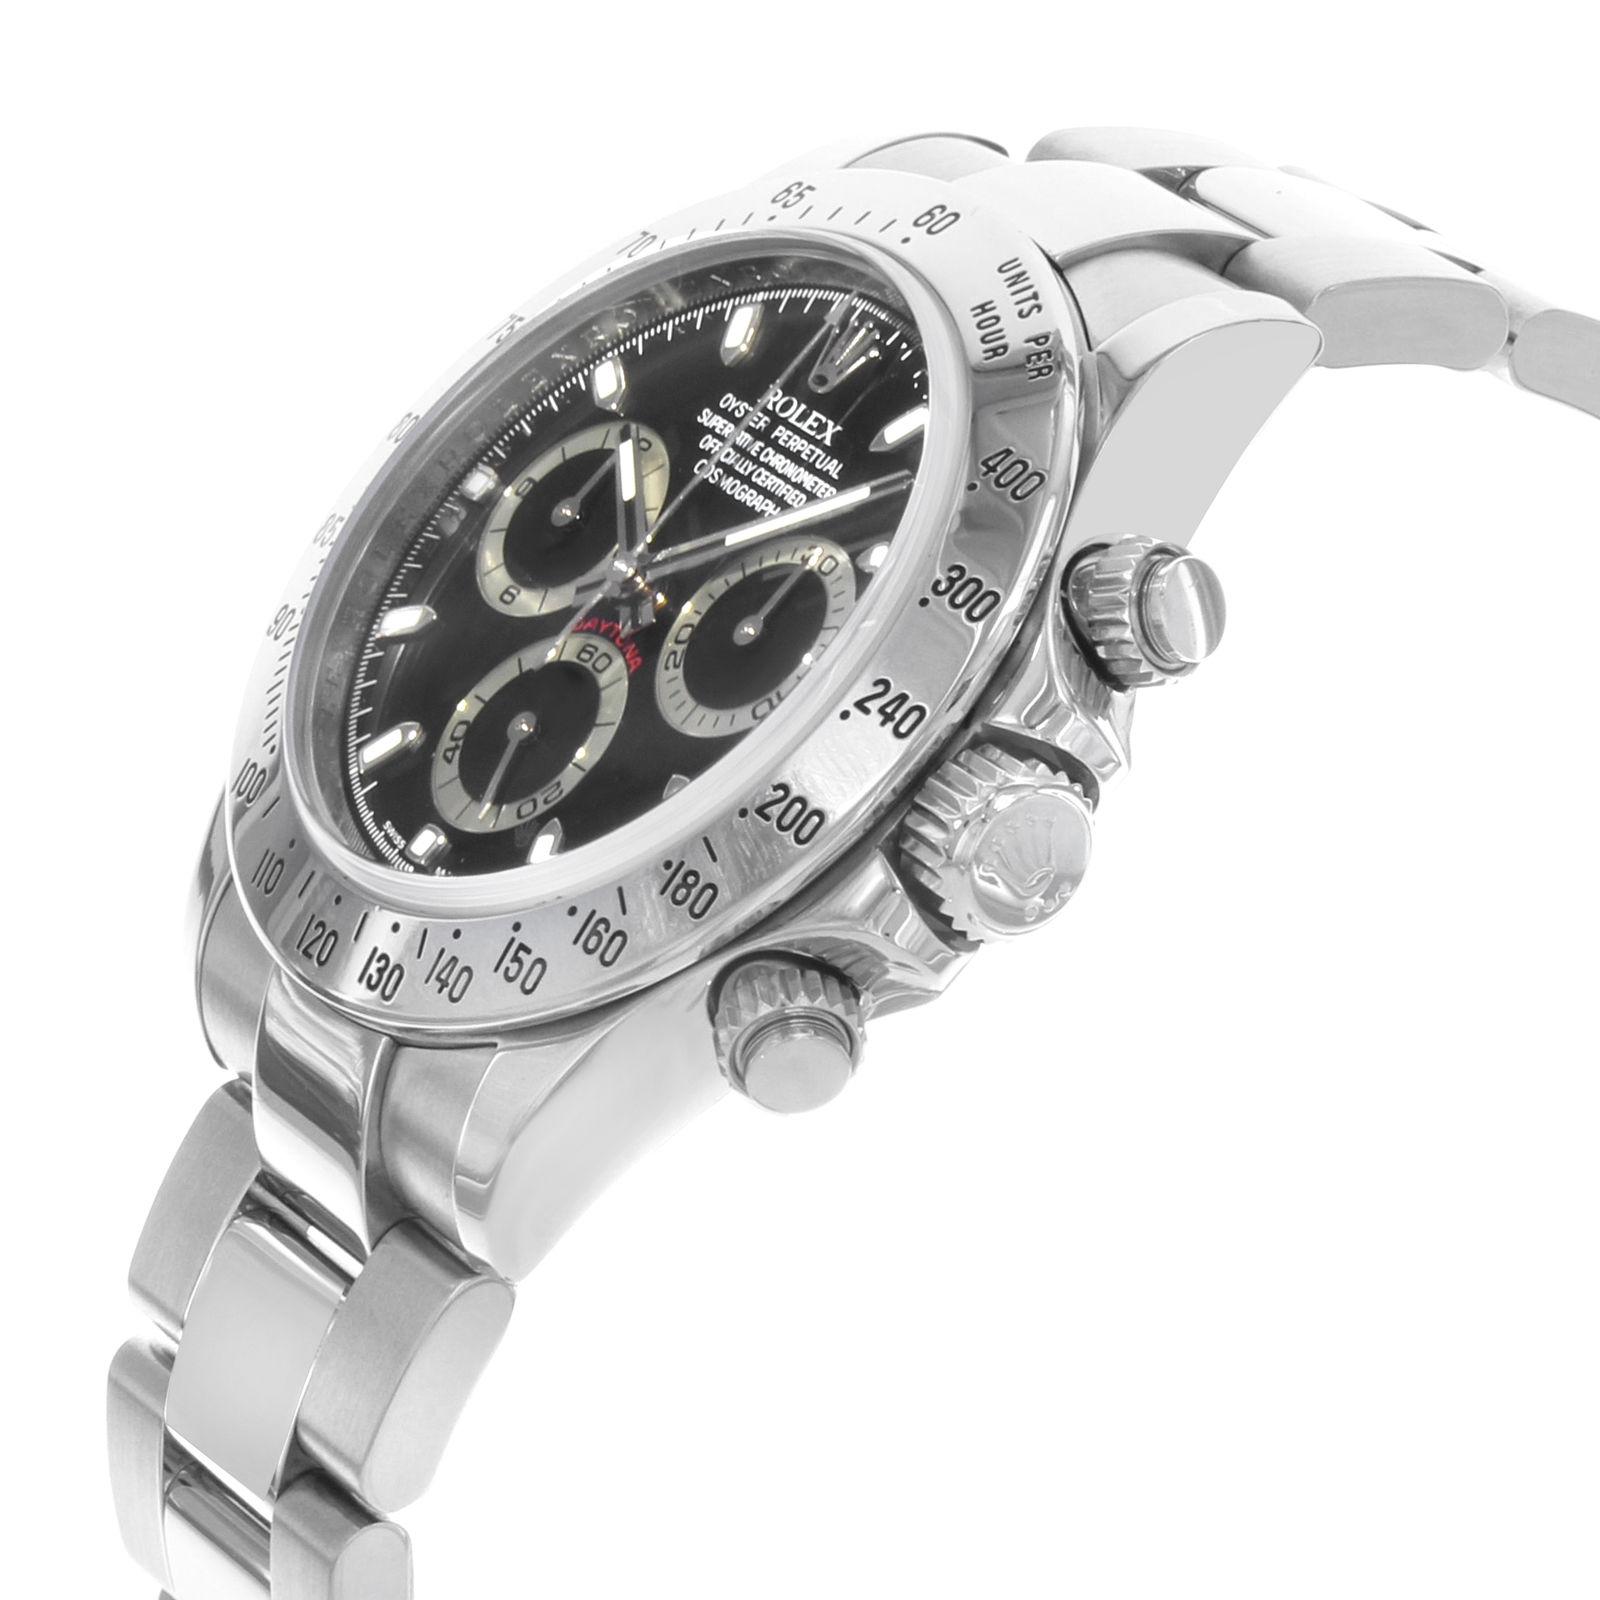 (20683)
This pre-owned Rolex Daytona 116520 is a beautiful men's timepiece that is powered by an automatic movement which is cased in a stainless steel case. It has a round shape face, chronograph, date, small seconds subdial dial and has hand